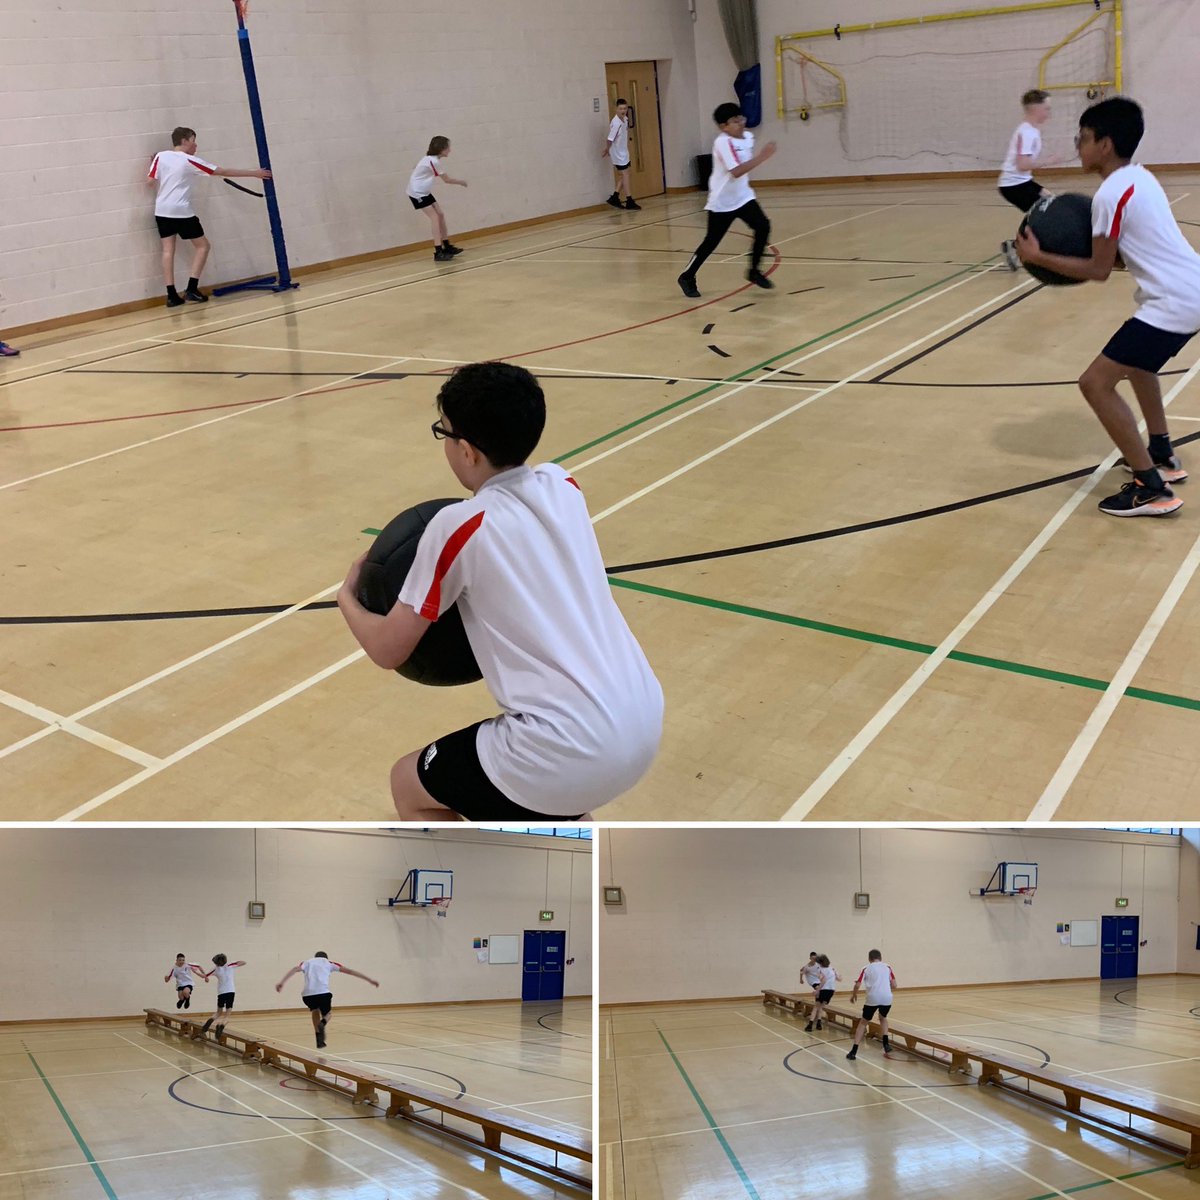 7JO showing off some excellent technique under high intensity today during ‘Functional Me’🏋🏻 Da Iawn👏🏼 #Squat #FunctionalMovements